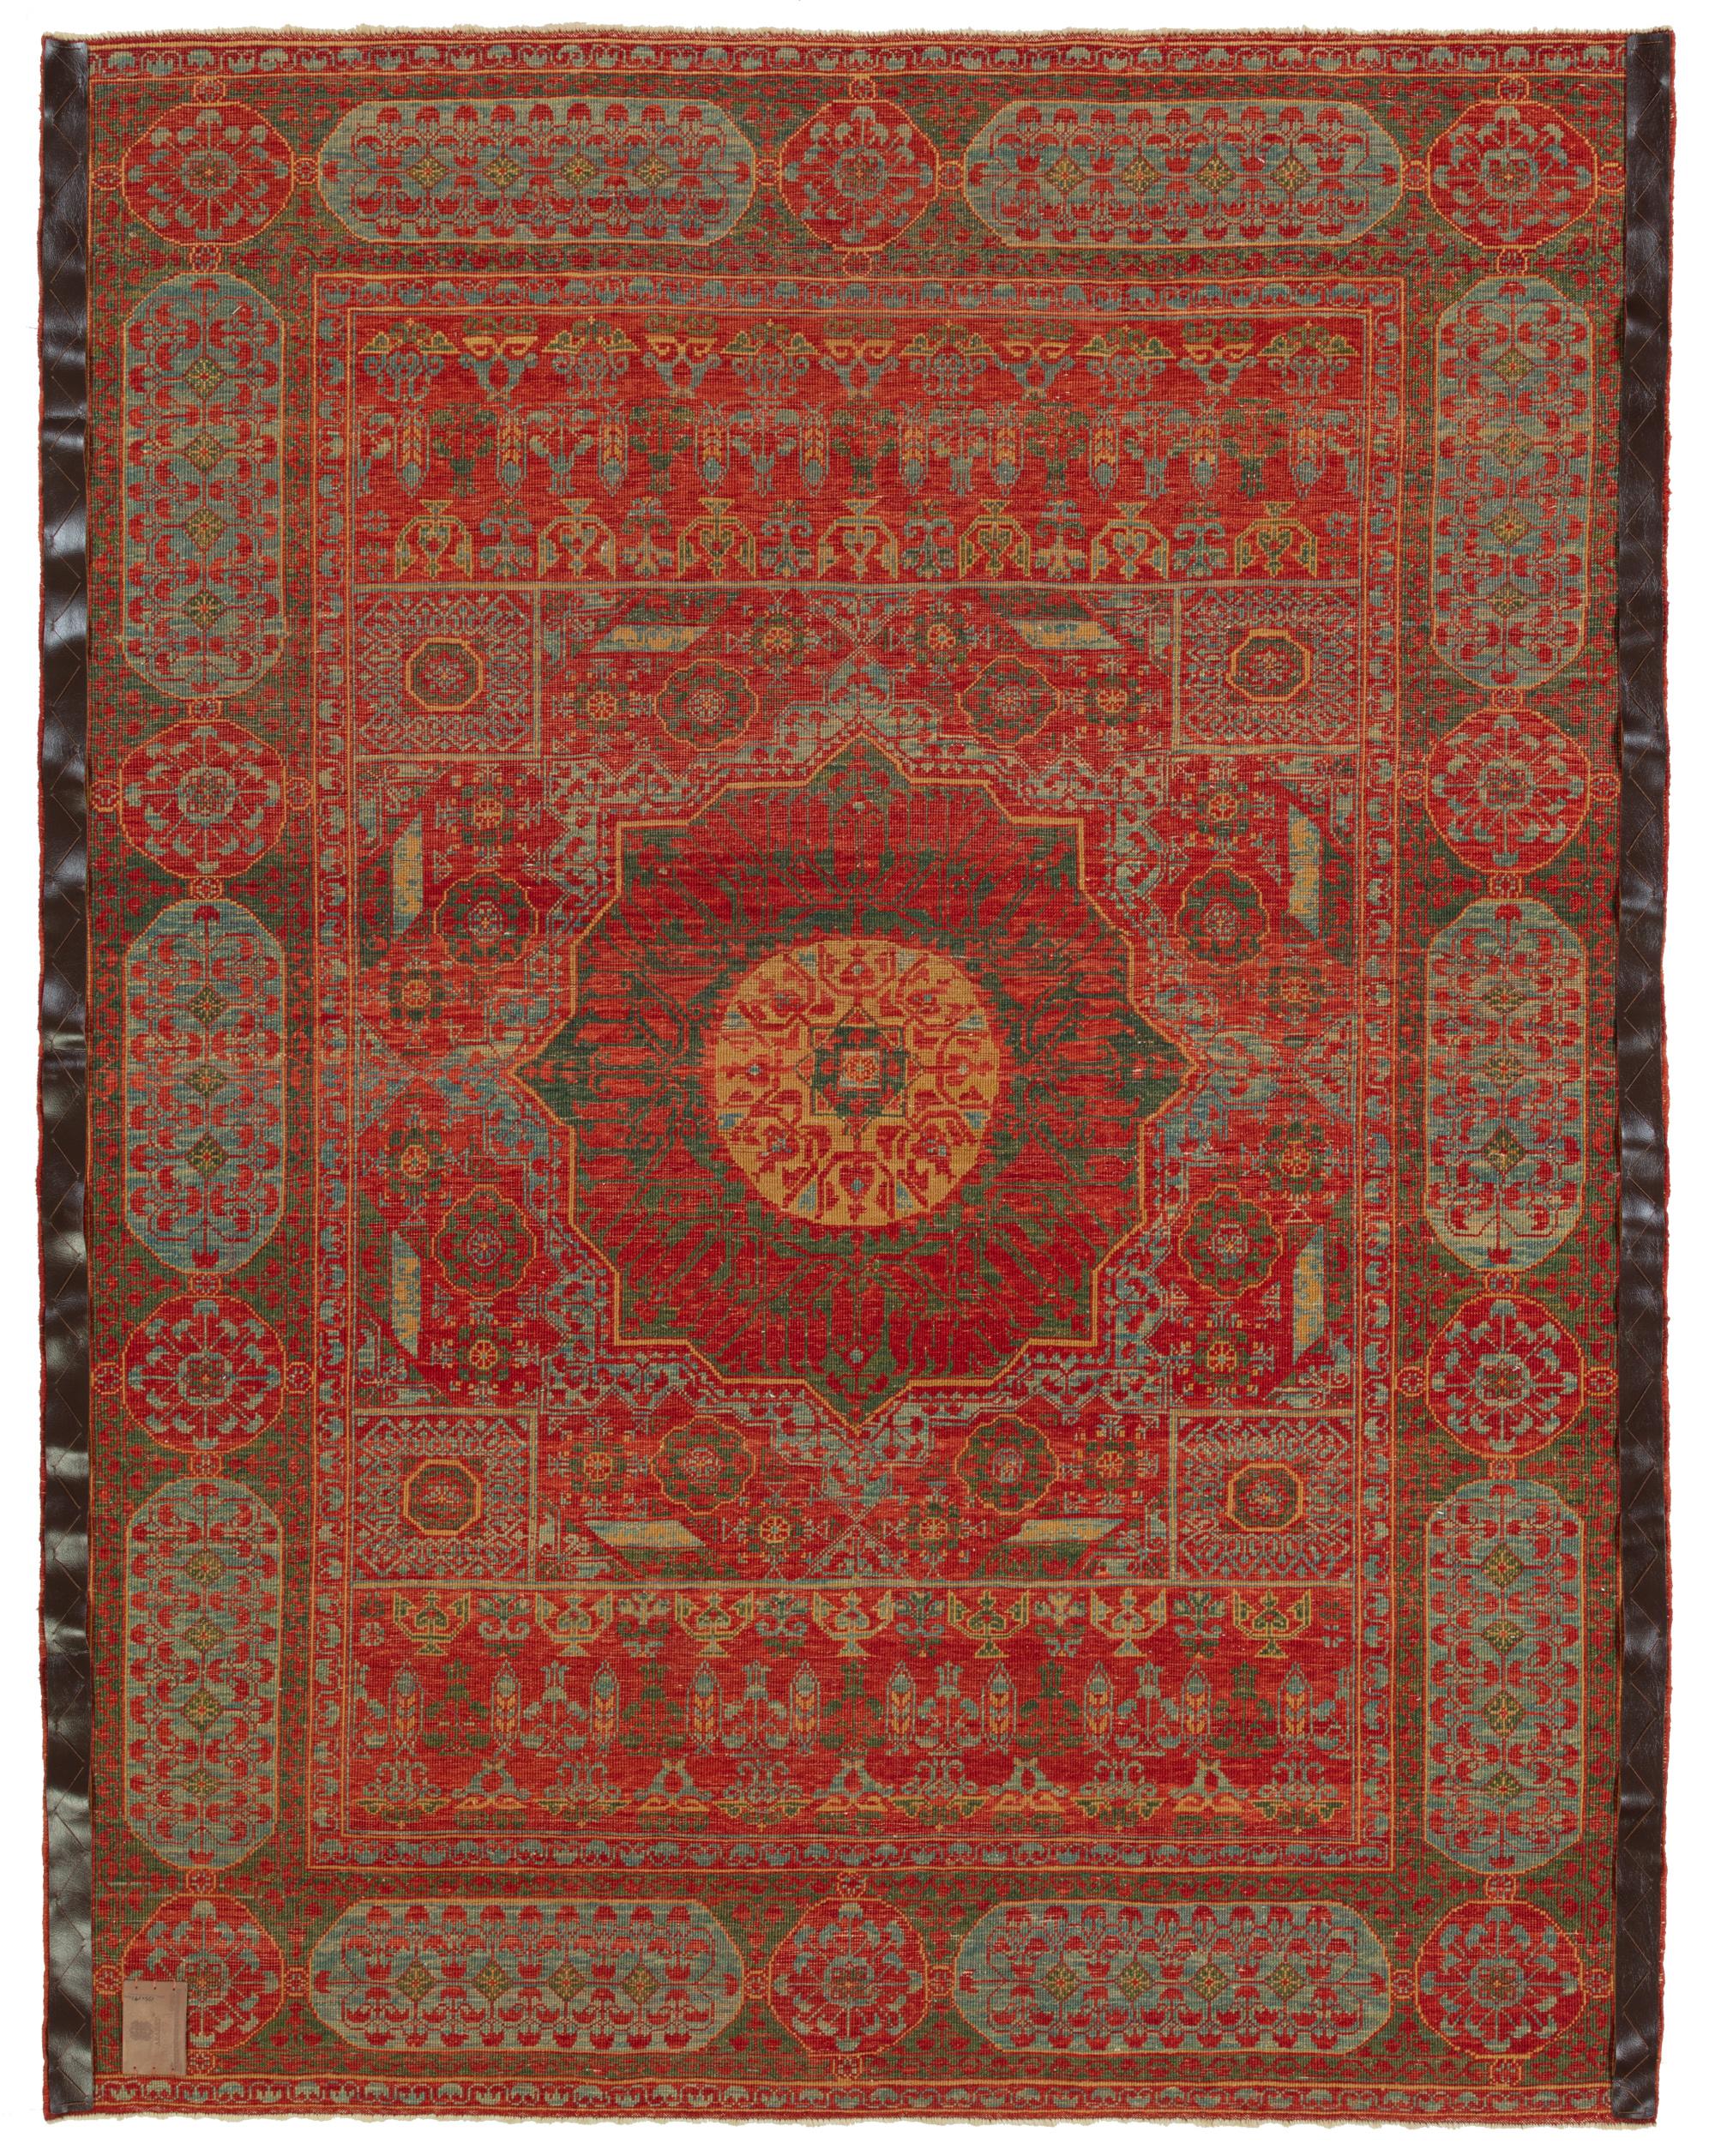 The design source of the rug comes from the book Renaissance of Islam, Art of the Mamluks, Esin Atil, Smithsonian Institution Press, Washington D.C., 1981 nr.127. This rug with the central star was designed in the early 16th-century rug by Mamluk